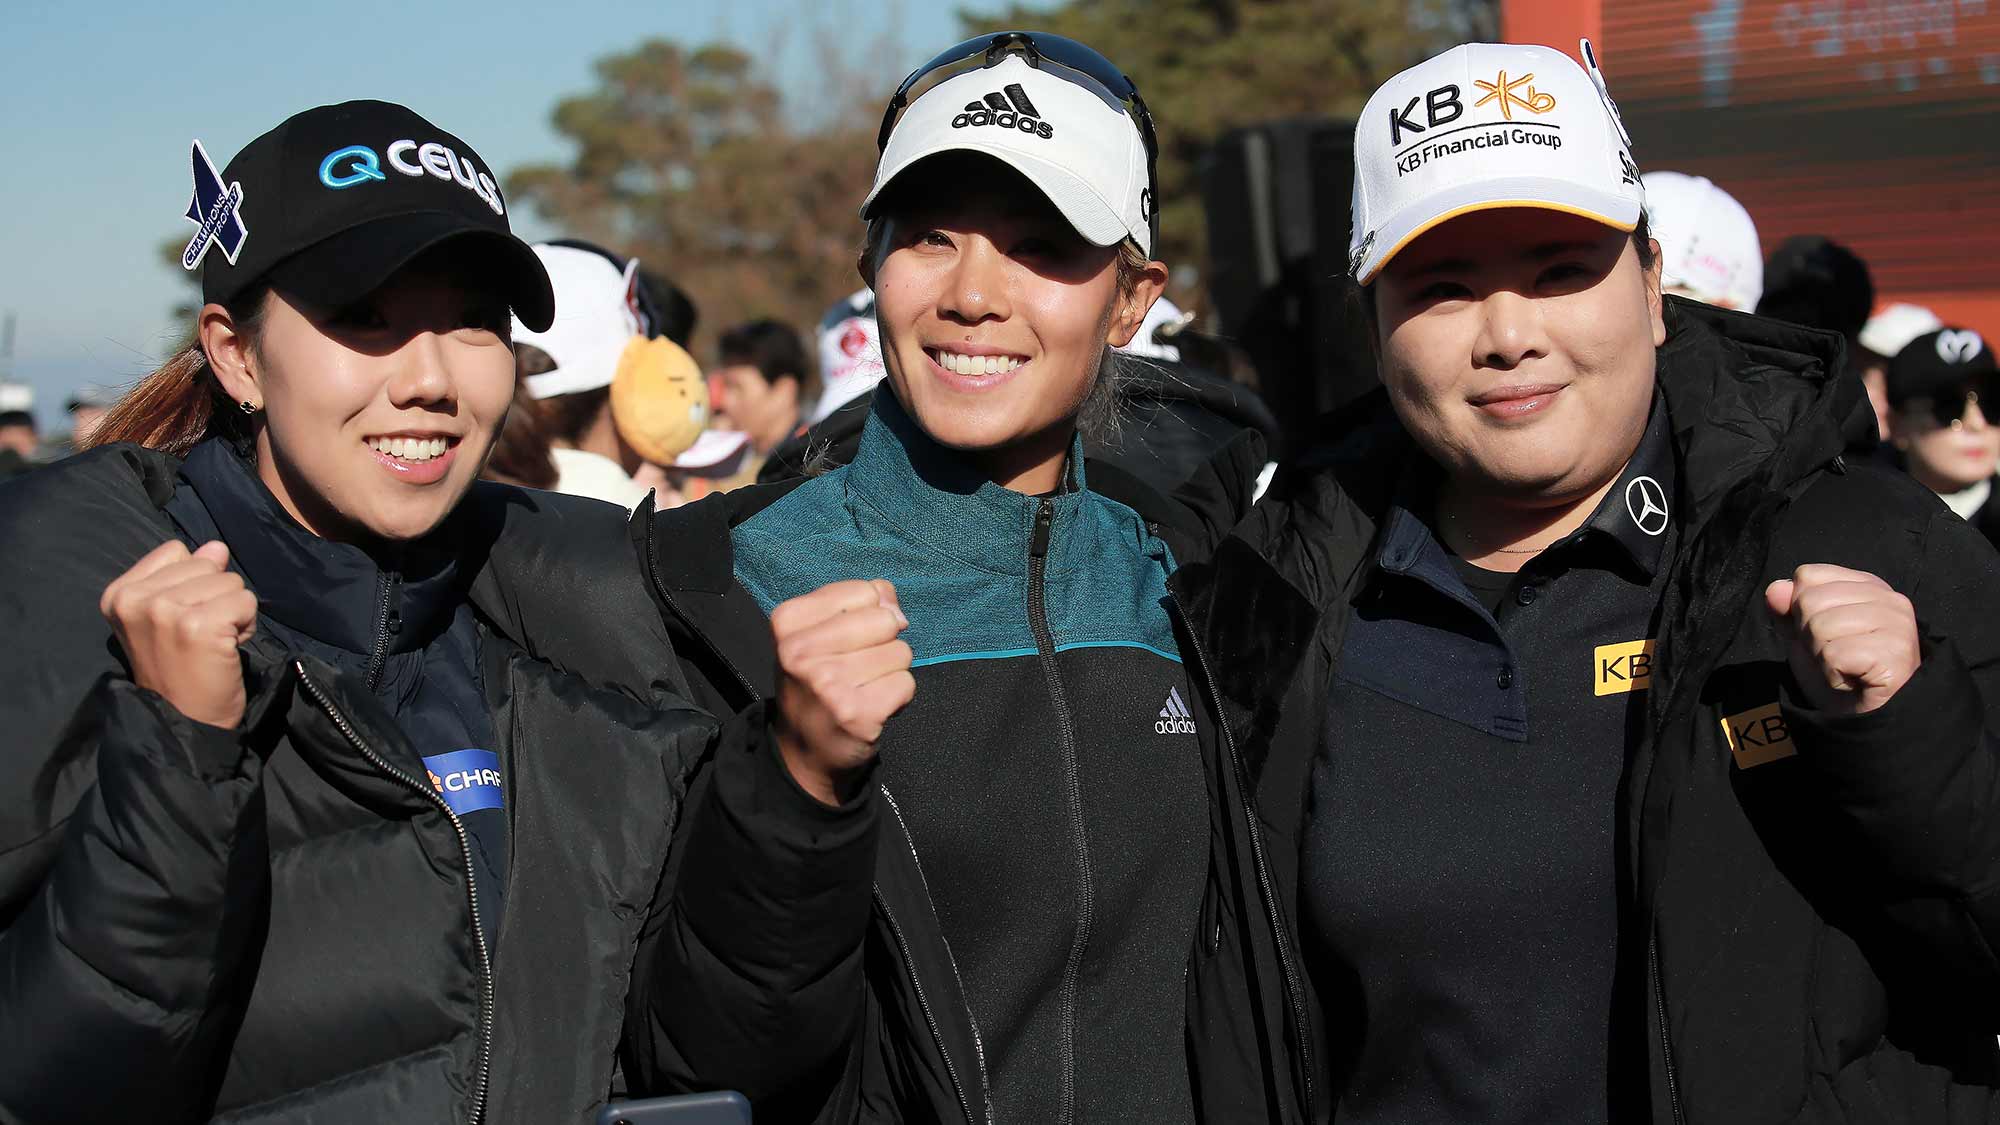 Jenny Shin, Danielle Kang and Inbee Park pose for a photo during the Orange Life Champions Trophy Inbee Park Invitational at Blue One The Honors Country Club in Gyeongju, Republic of Korea